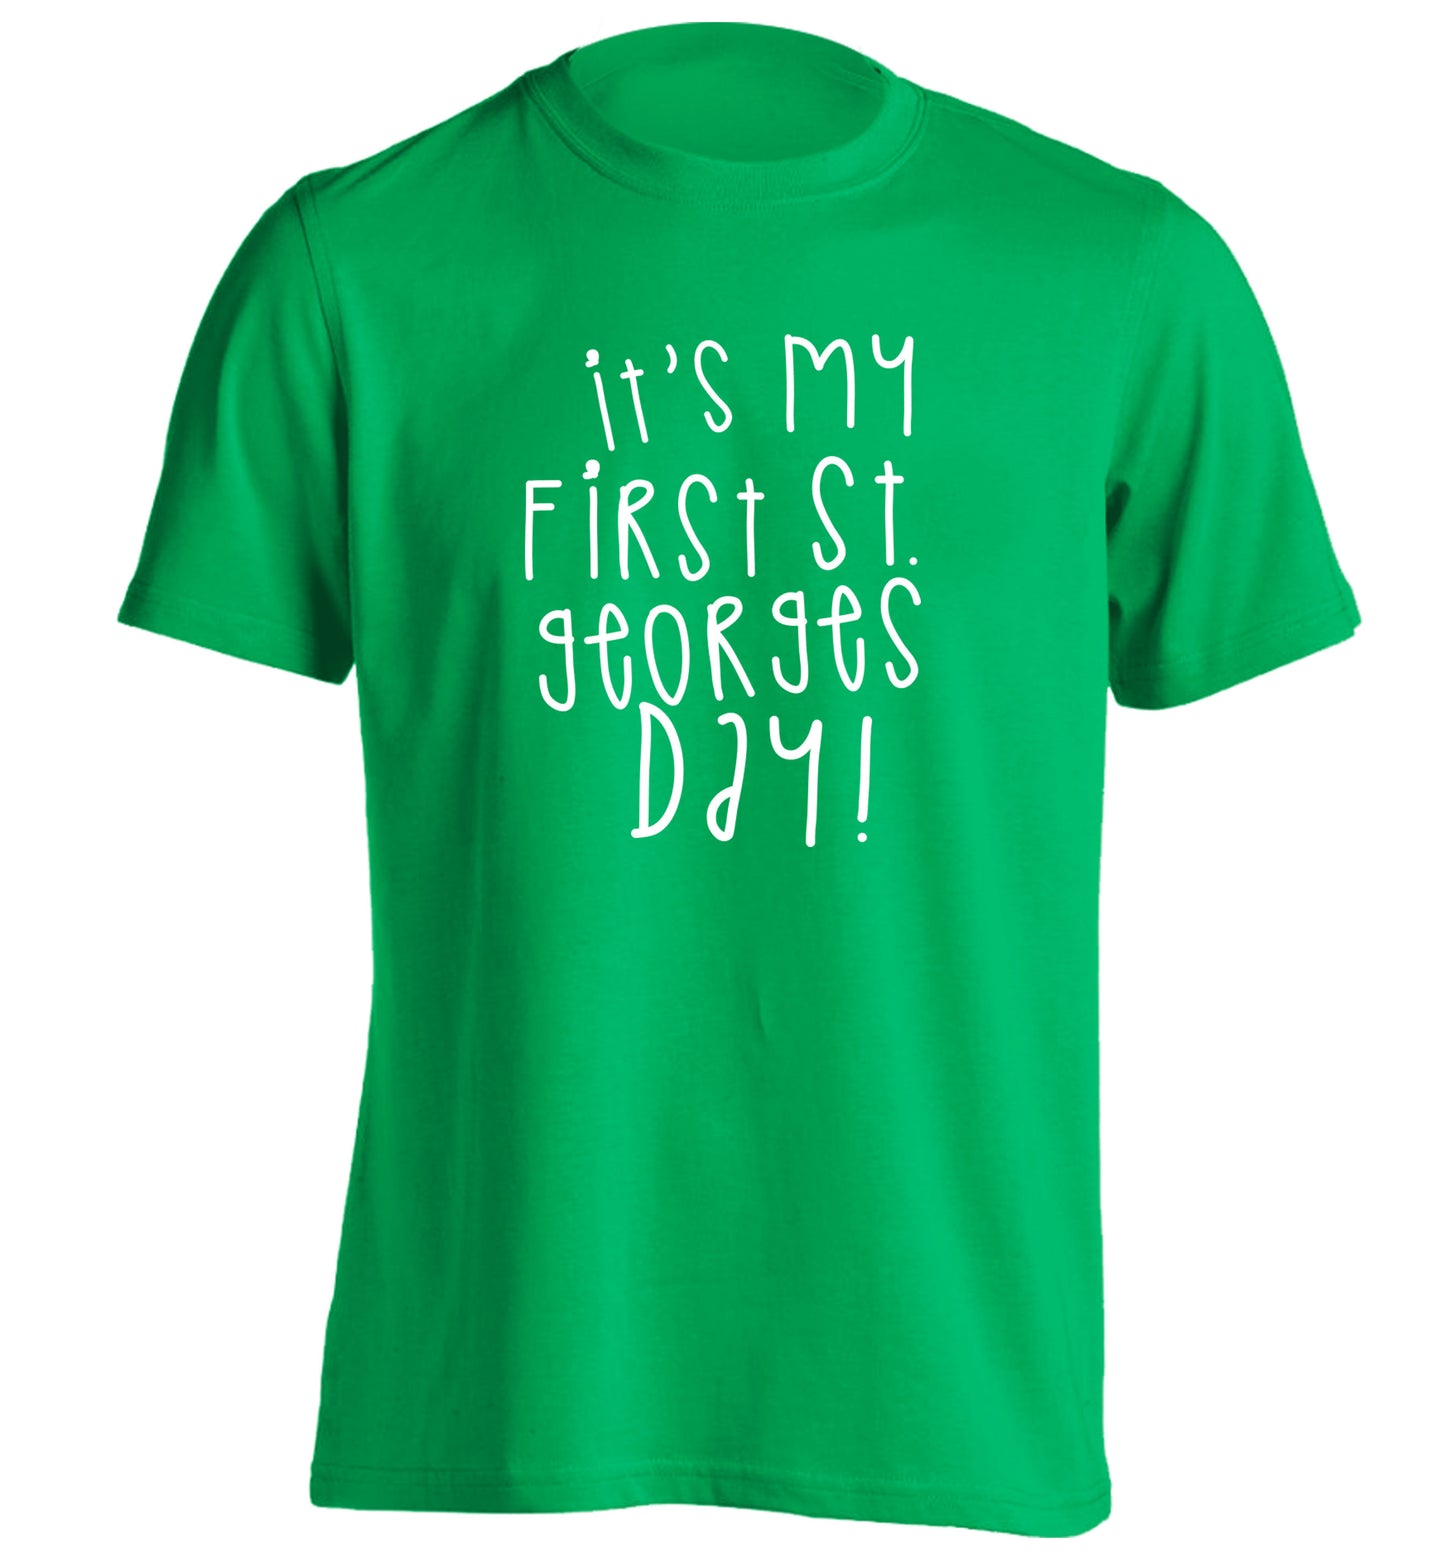 It's my first St Georges day adults unisex green Tshirt 2XL